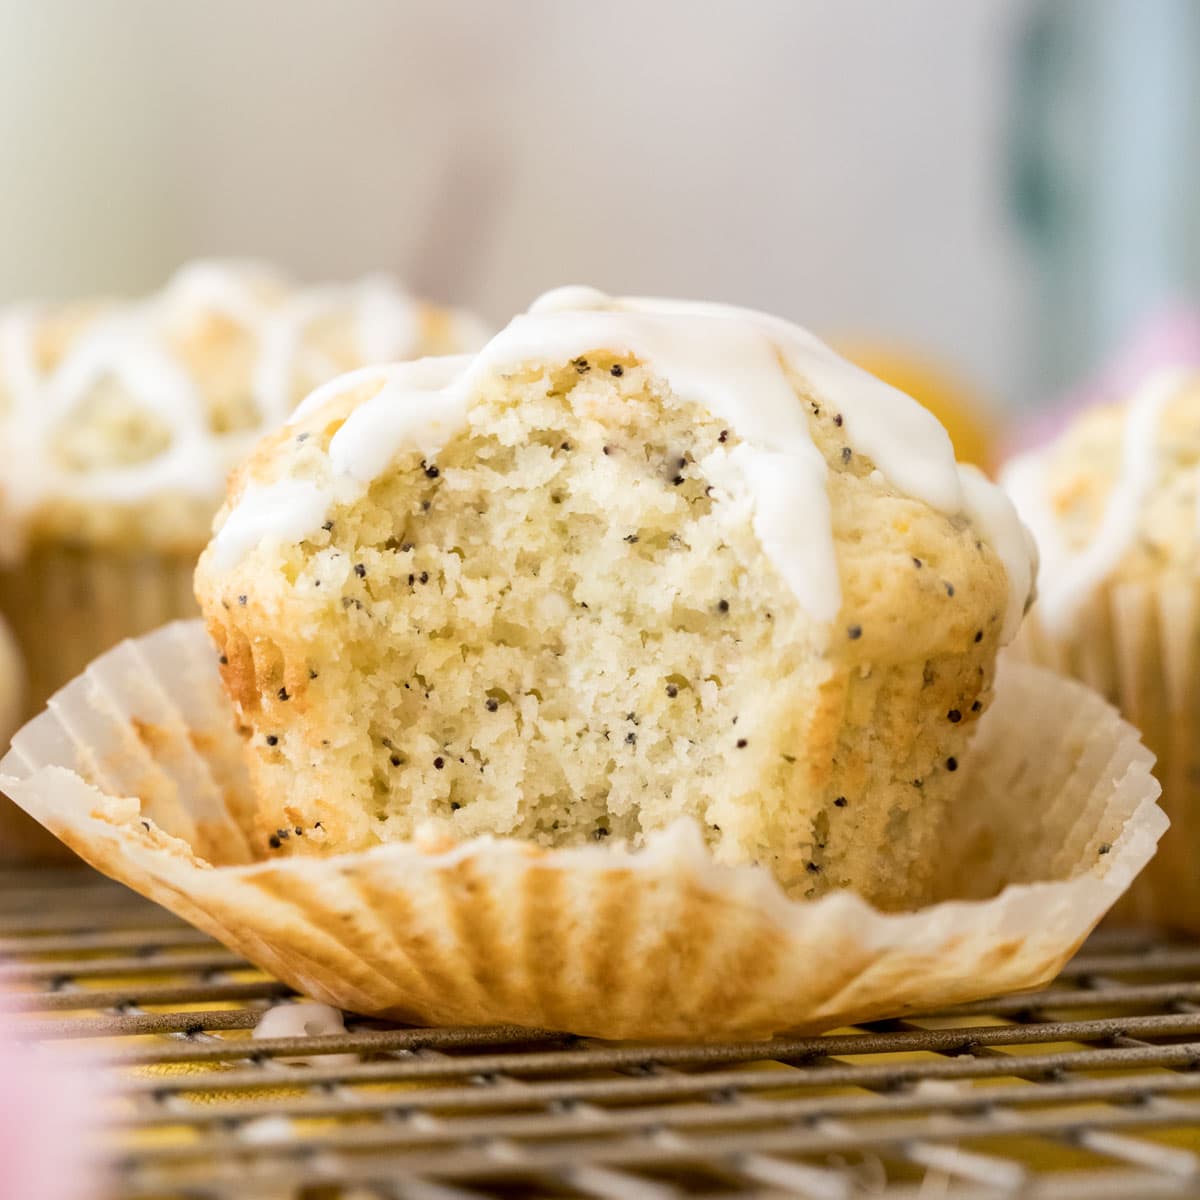 Image for POPPY SEED MUFFIN.